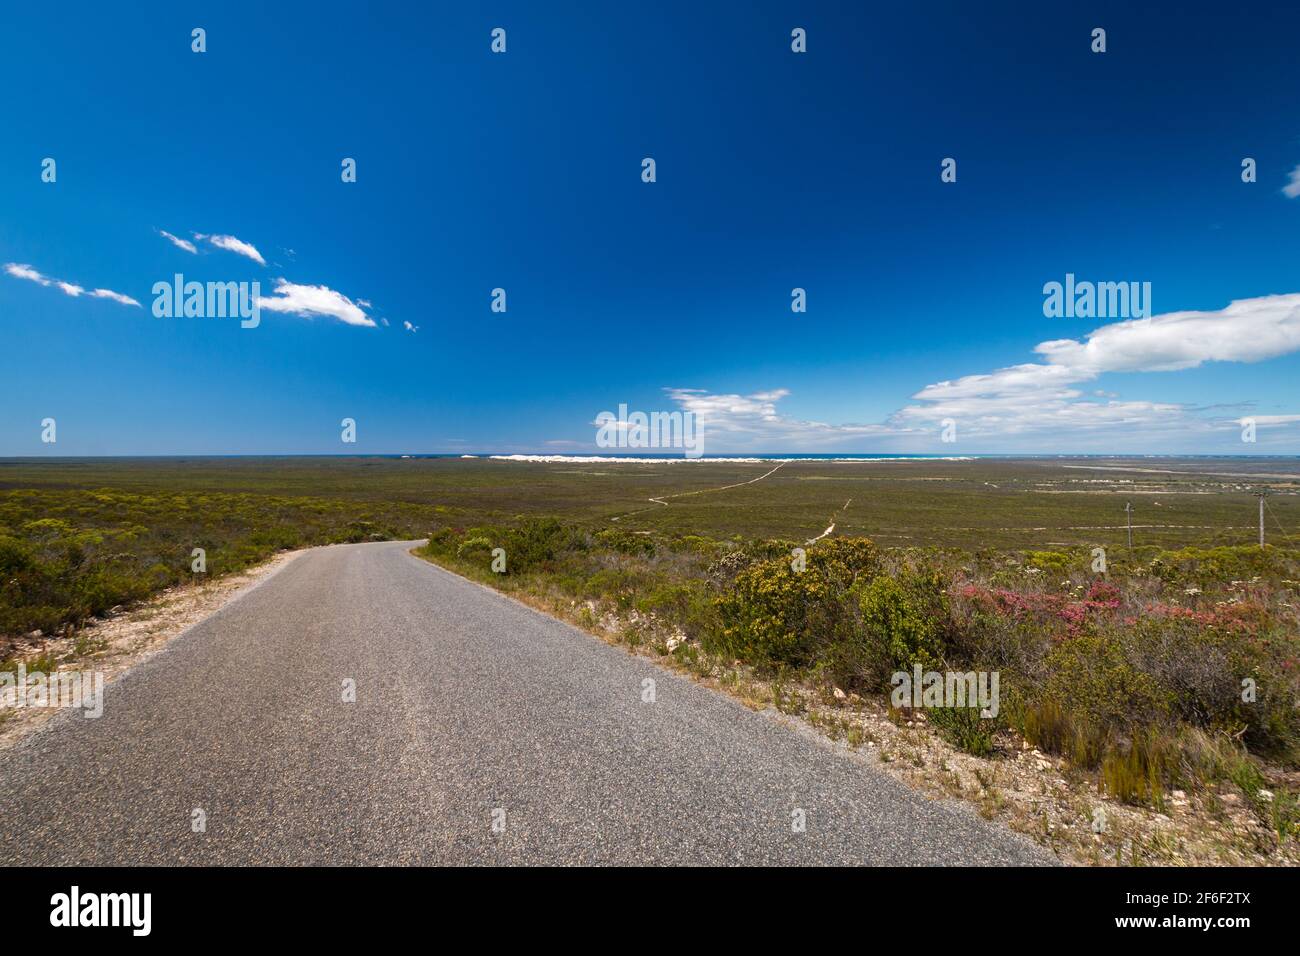 Scenic view of street leading to through fynbos vegetation De Hoop nature reserve with sand dunes at Atlantic Ocean coast, South Africa against sky Stock Photo